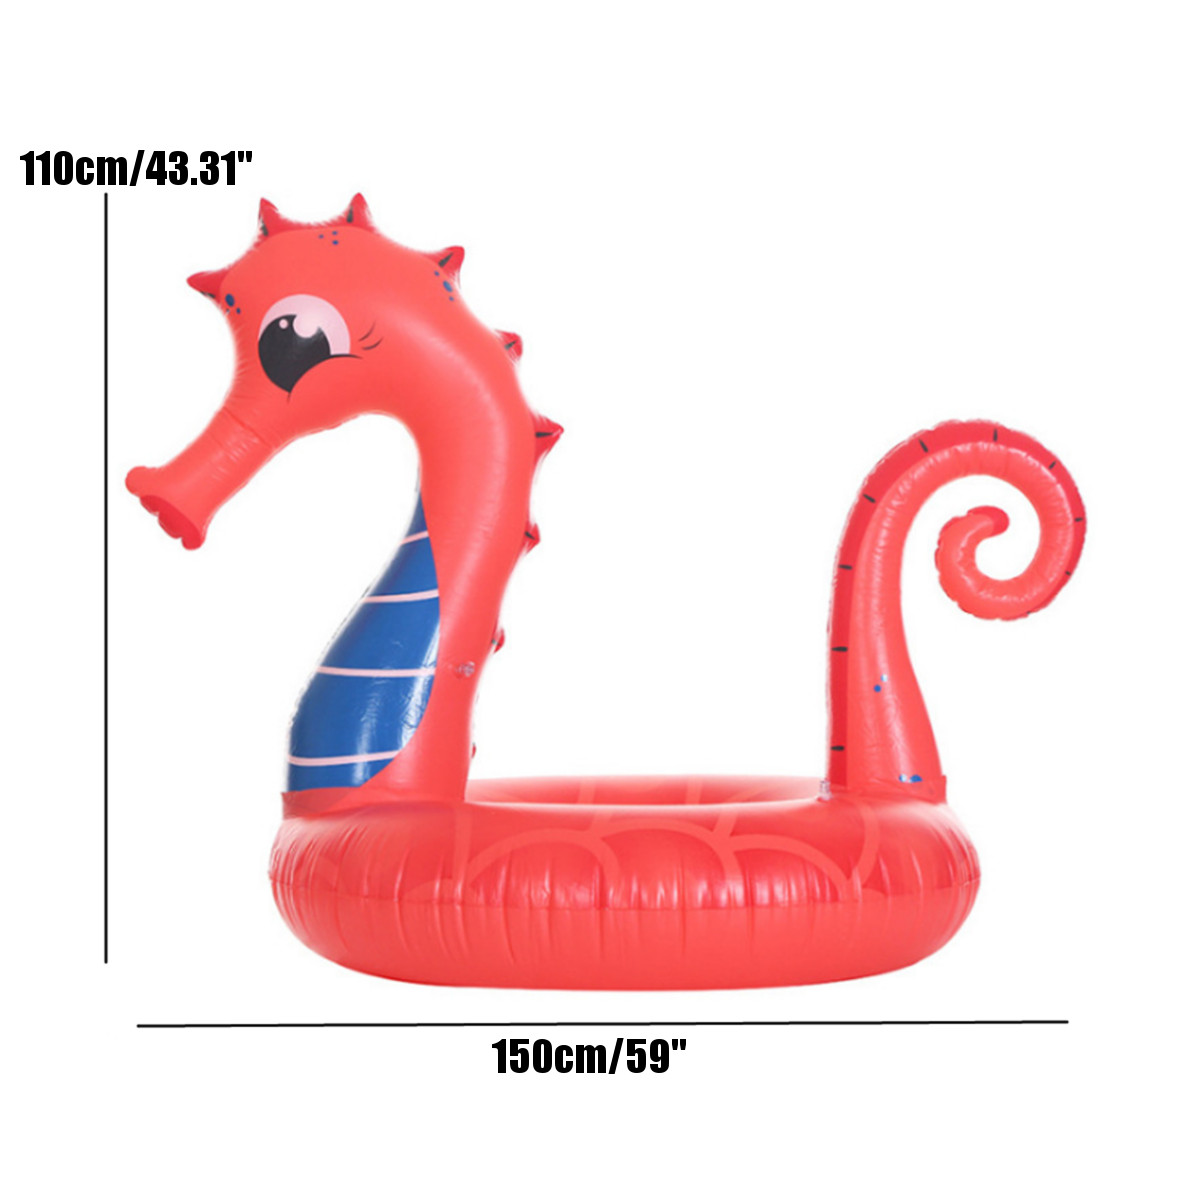 Large-Seahorse-Inflatable-Hippocampus-Giant-Swimming-Pool-Ring-Floats-Bed-Water-Pool-Raft-Camping-Be-1723619-2